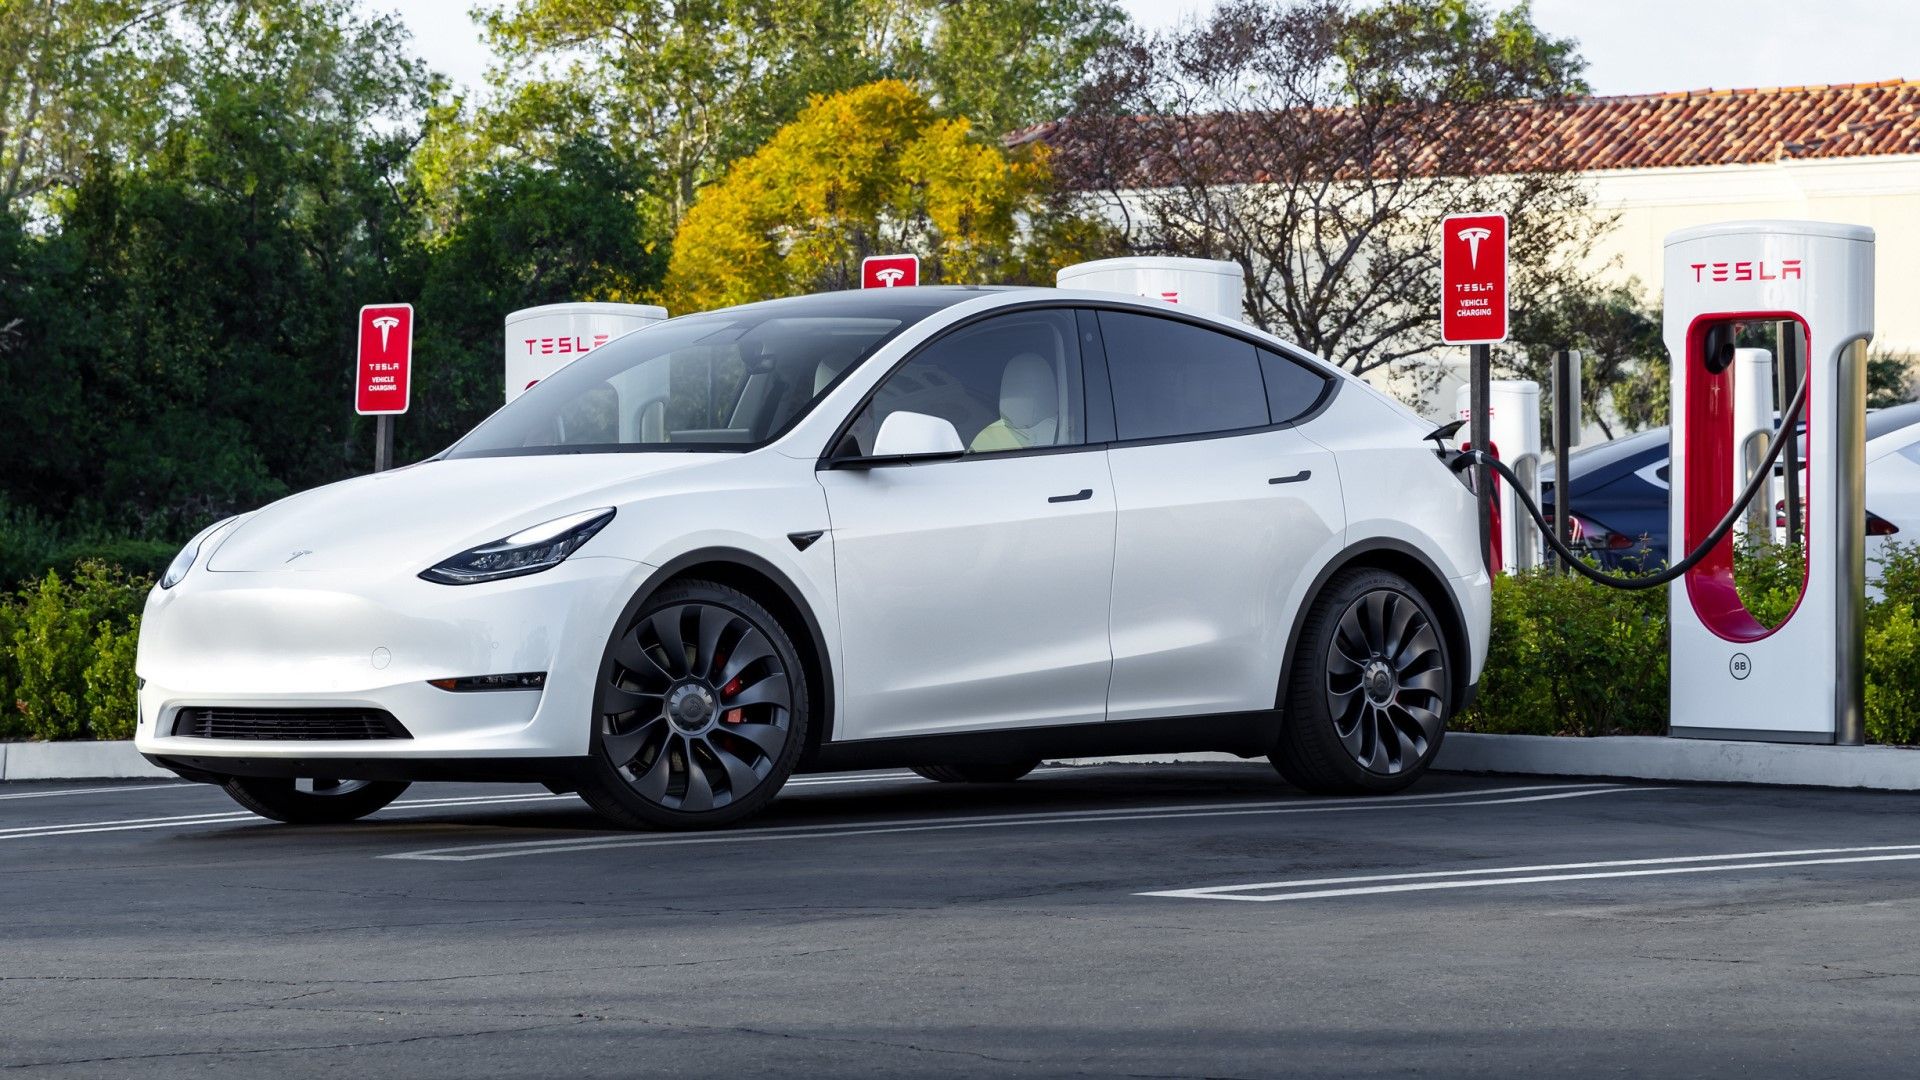 The ten largest electrical automobile charging firms ranked by variety of places